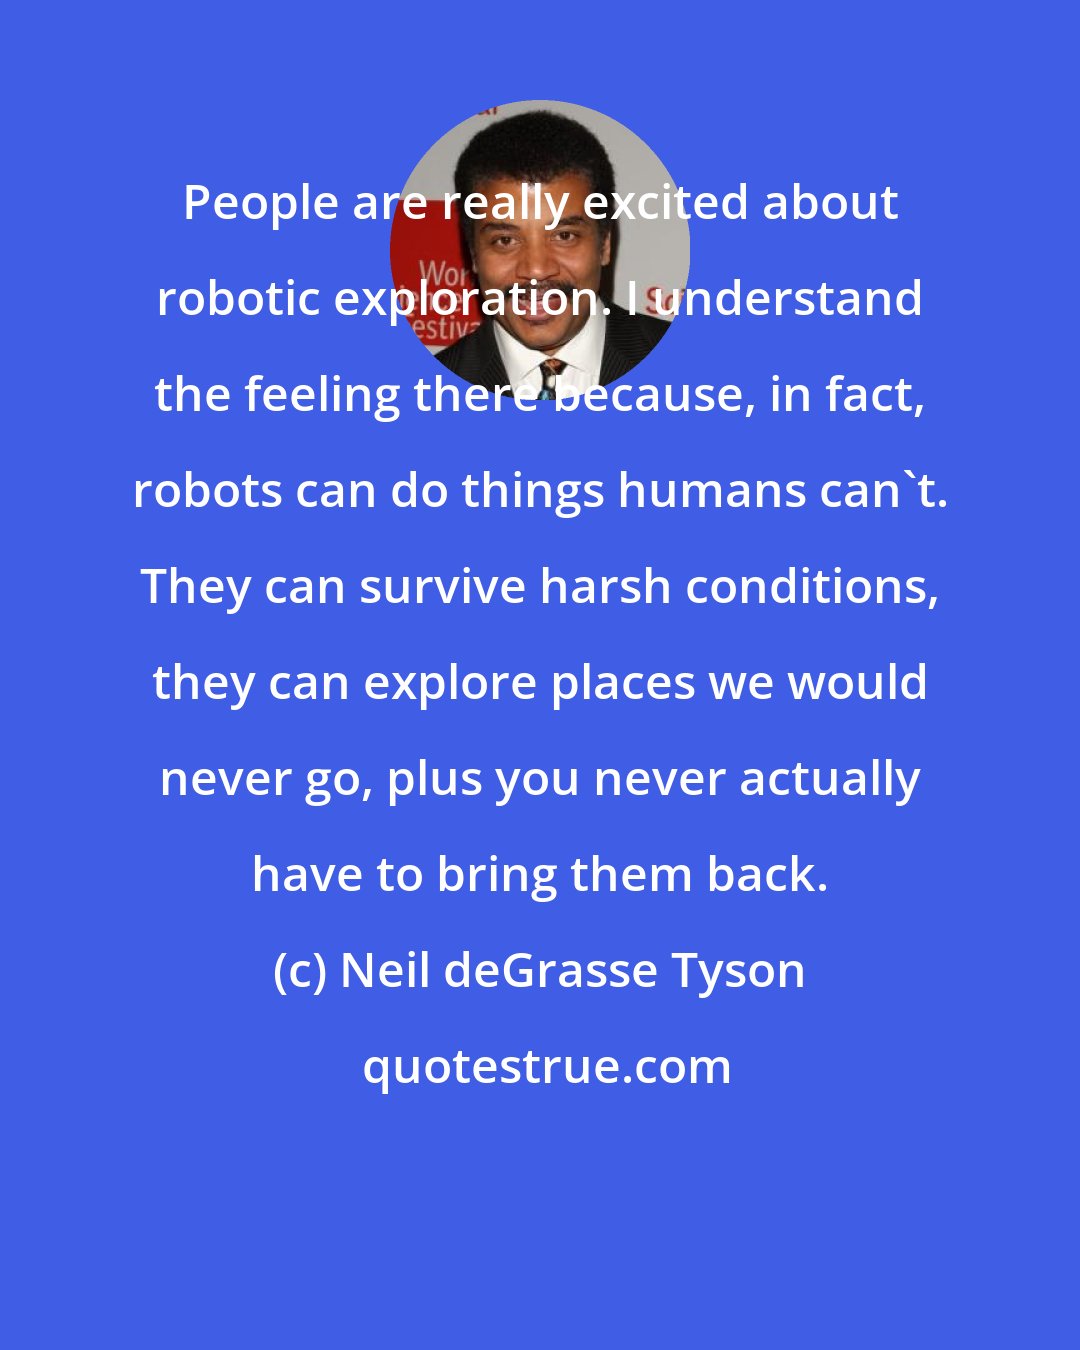 Neil deGrasse Tyson: People are really excited about robotic exploration. I understand the feeling there because, in fact, robots can do things humans can't. They can survive harsh conditions, they can explore places we would never go, plus you never actually have to bring them back.